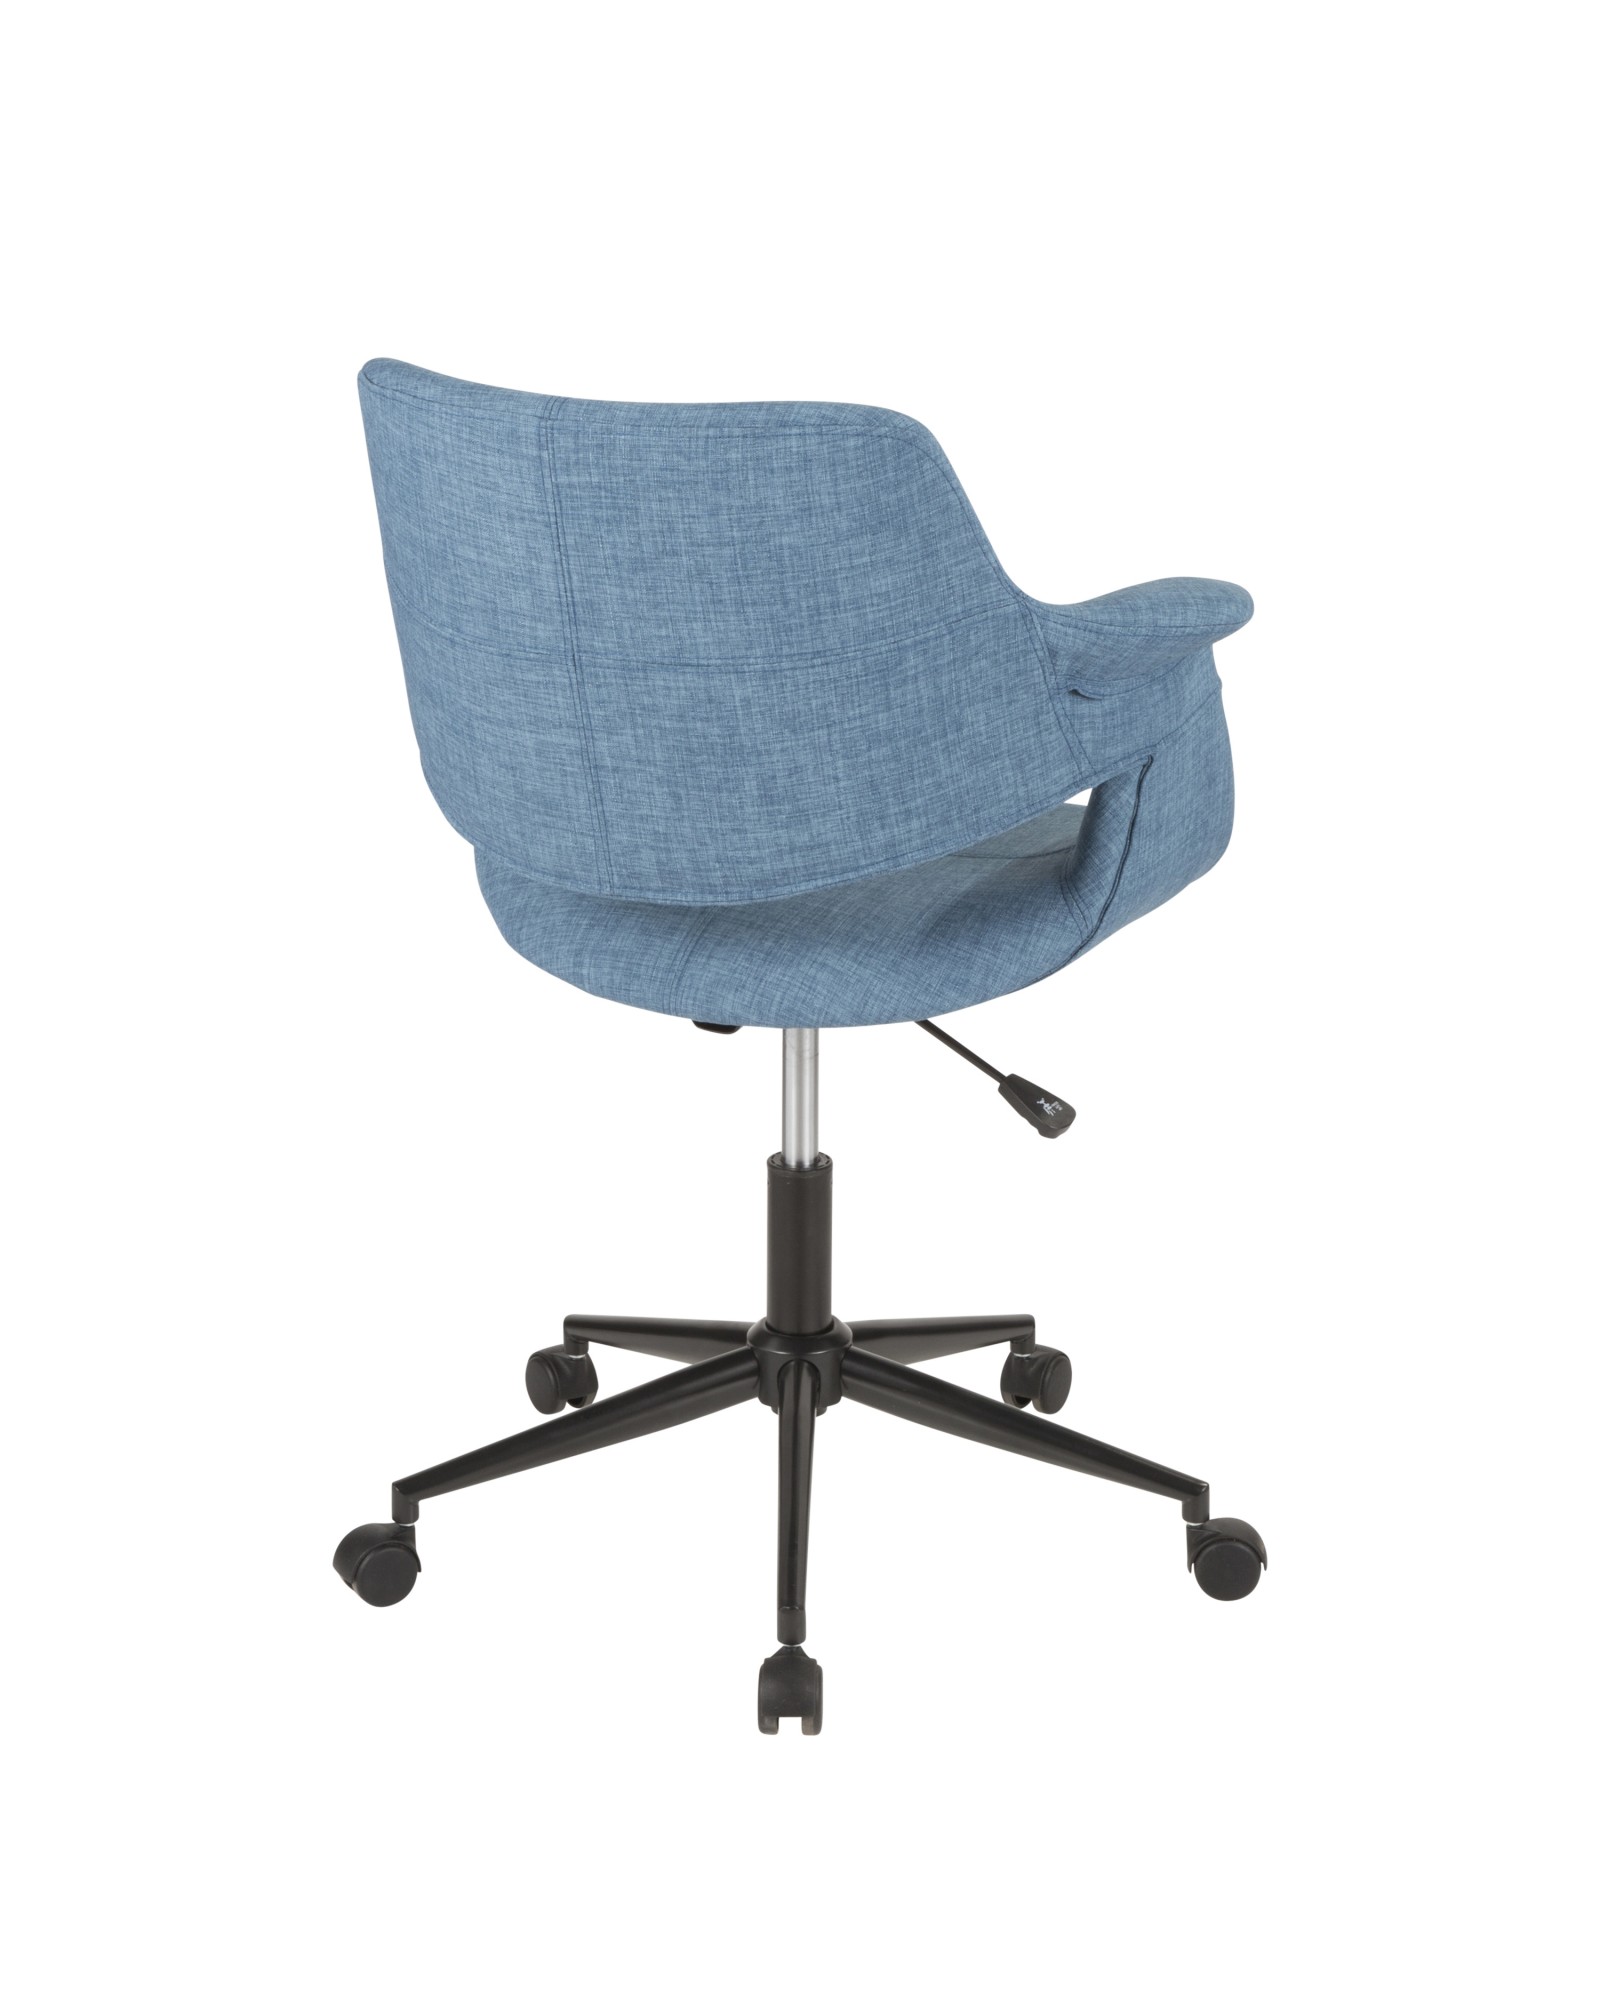 Vintage Flair Mid-Century Modern Office Chair in Blue with Black Metal Base